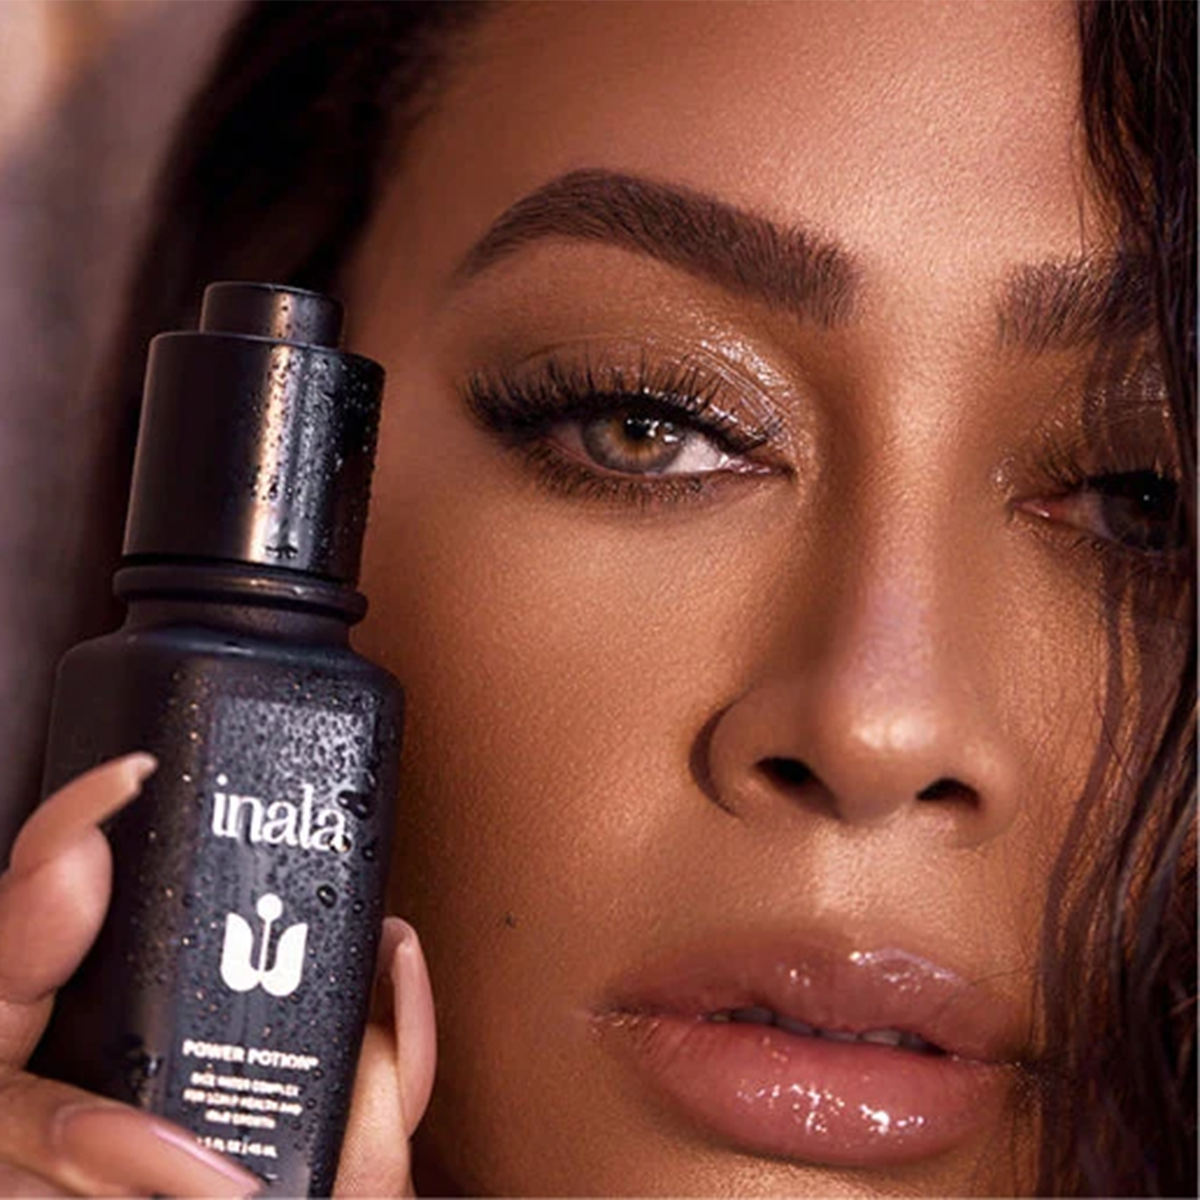 La La Anthony’s Inala Haircare Line Uses a Key Ingredient That Revives Damaged Hair – E! Online